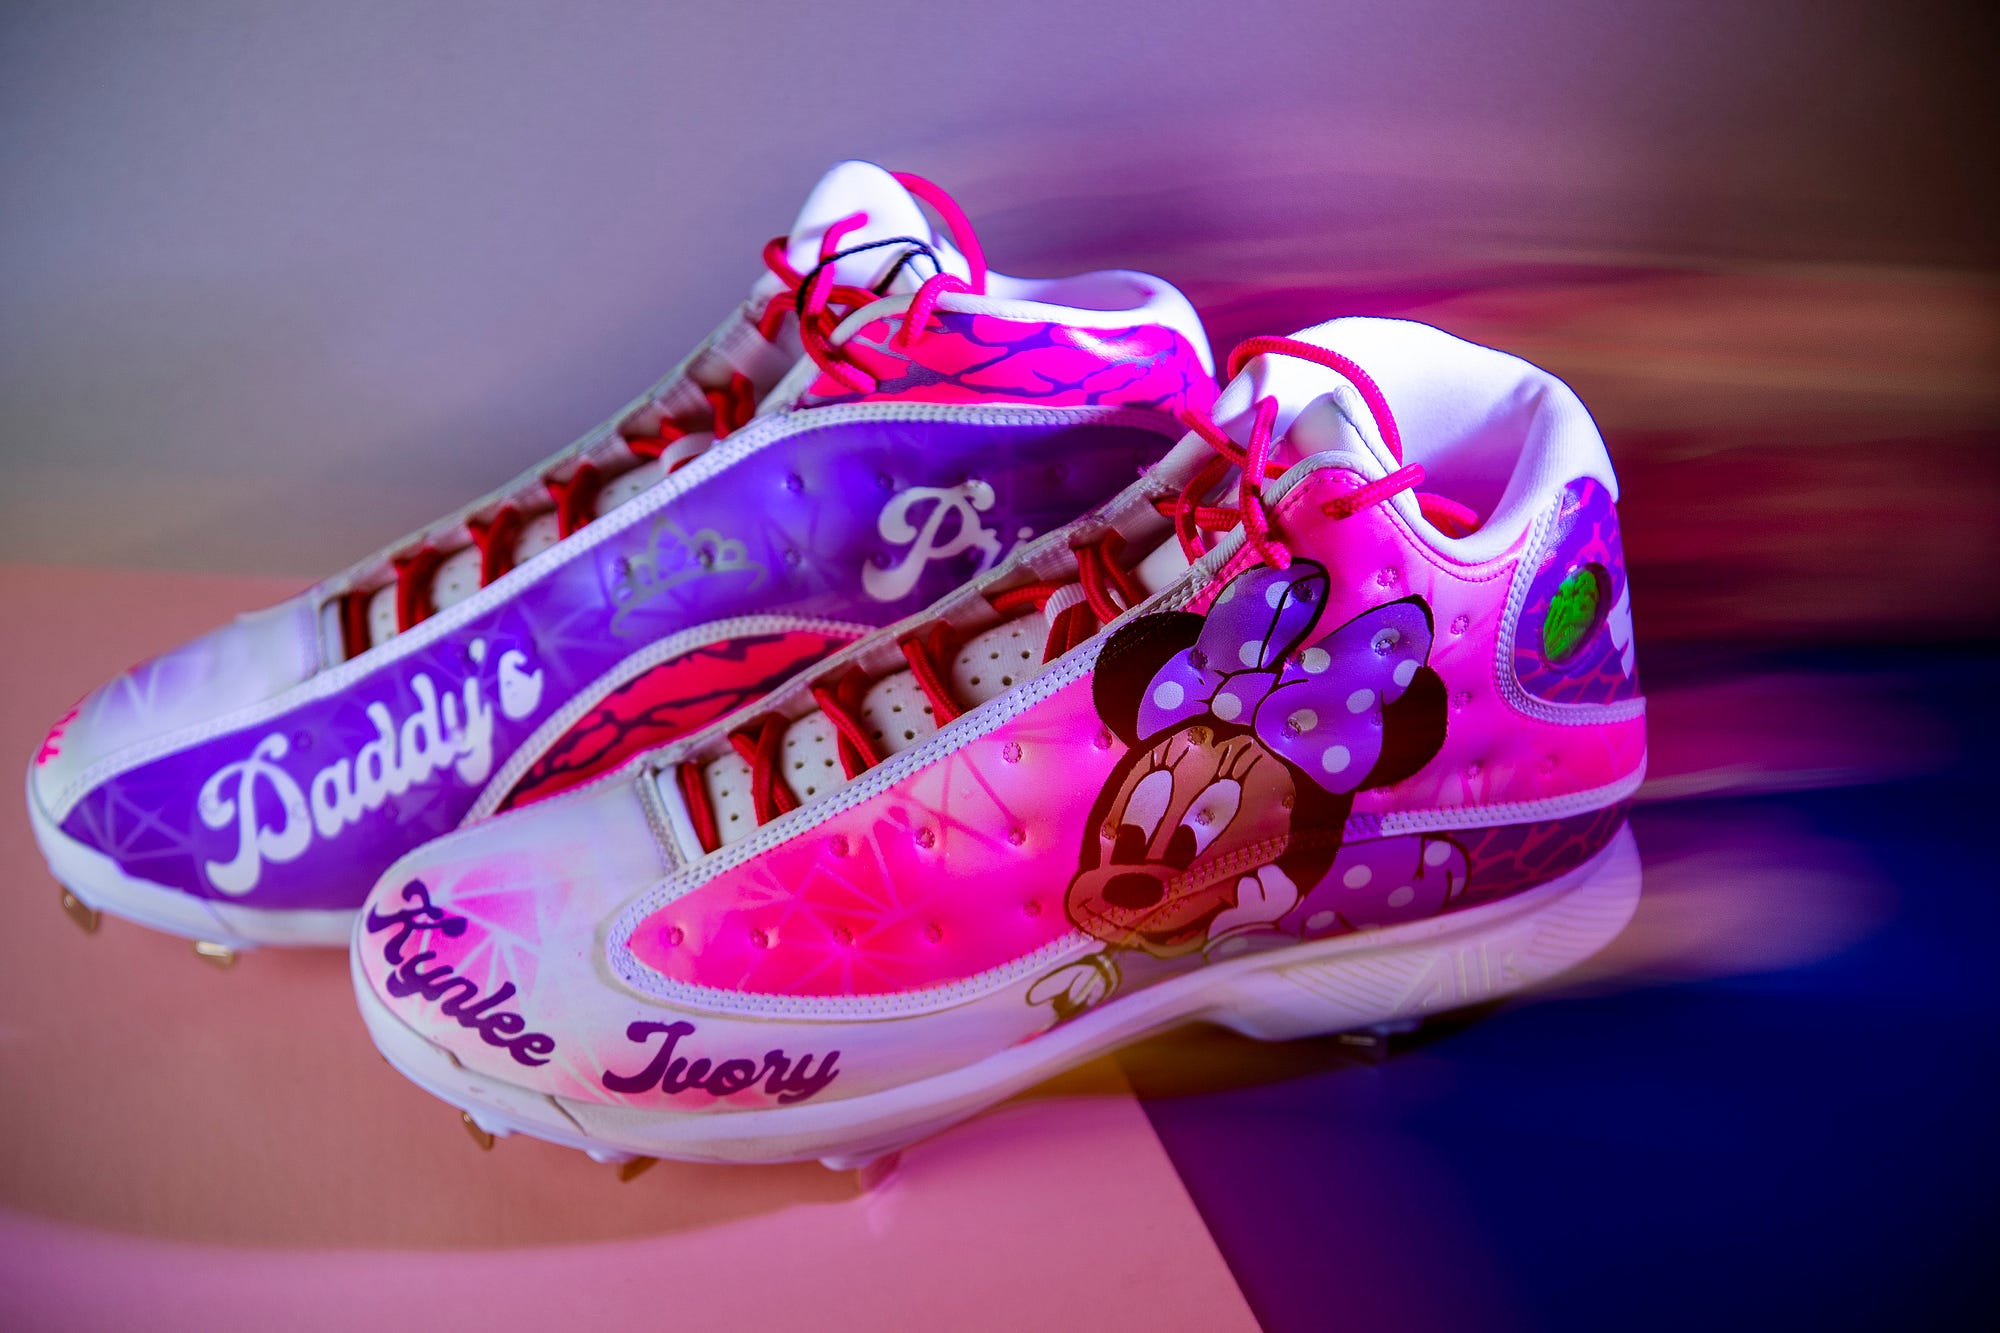 MLB Players' Weekend: Mookie Betts honors David Ortiz with cleats